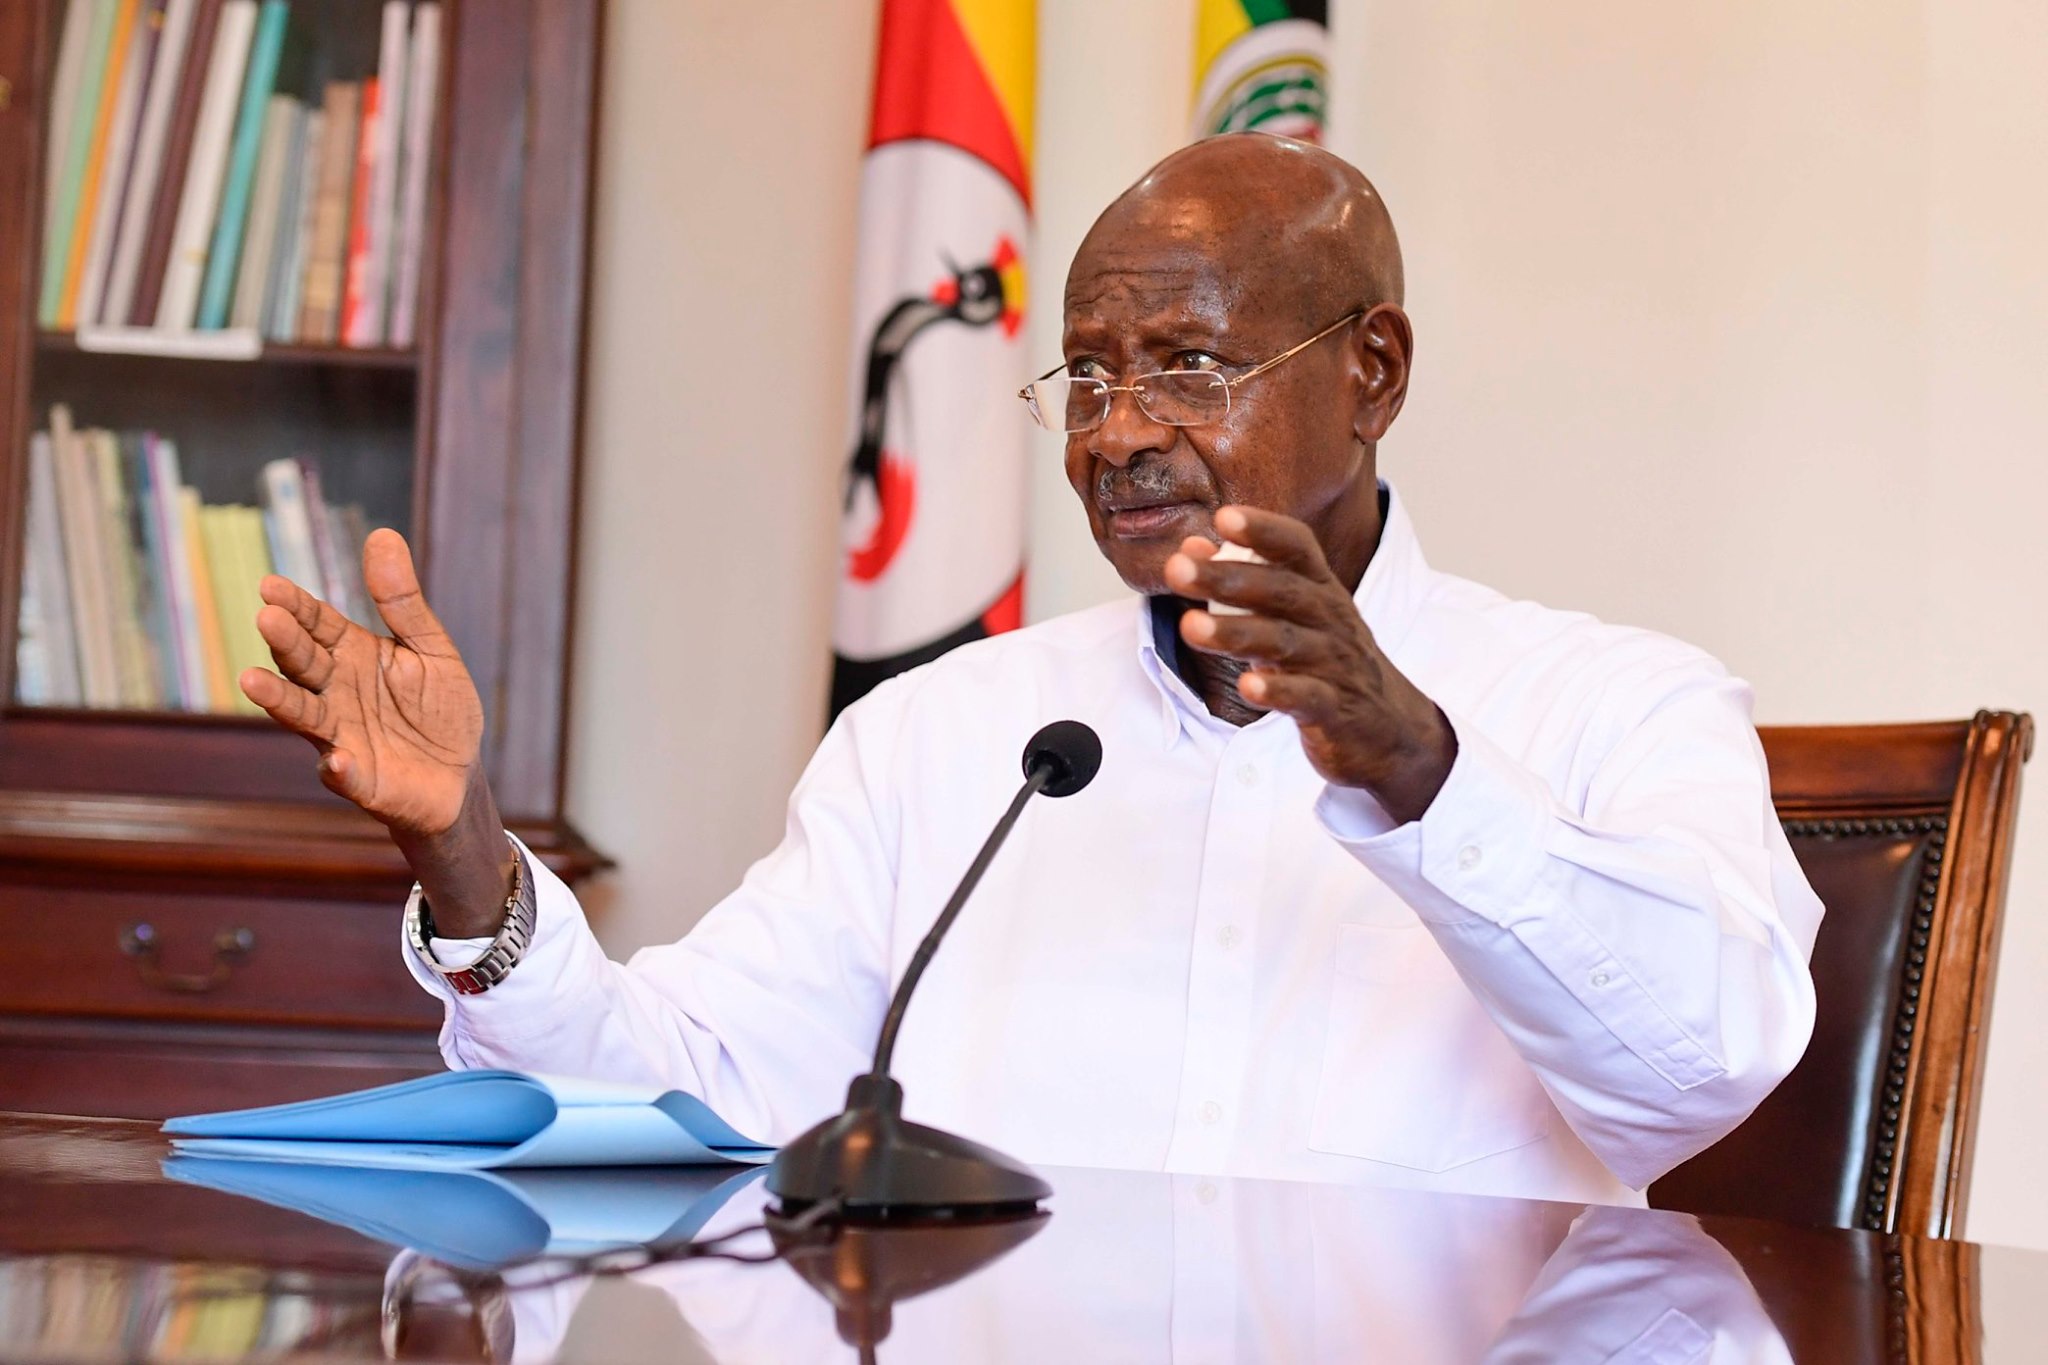 President Museveni to Launch Face Mask Manufacturing Company Today